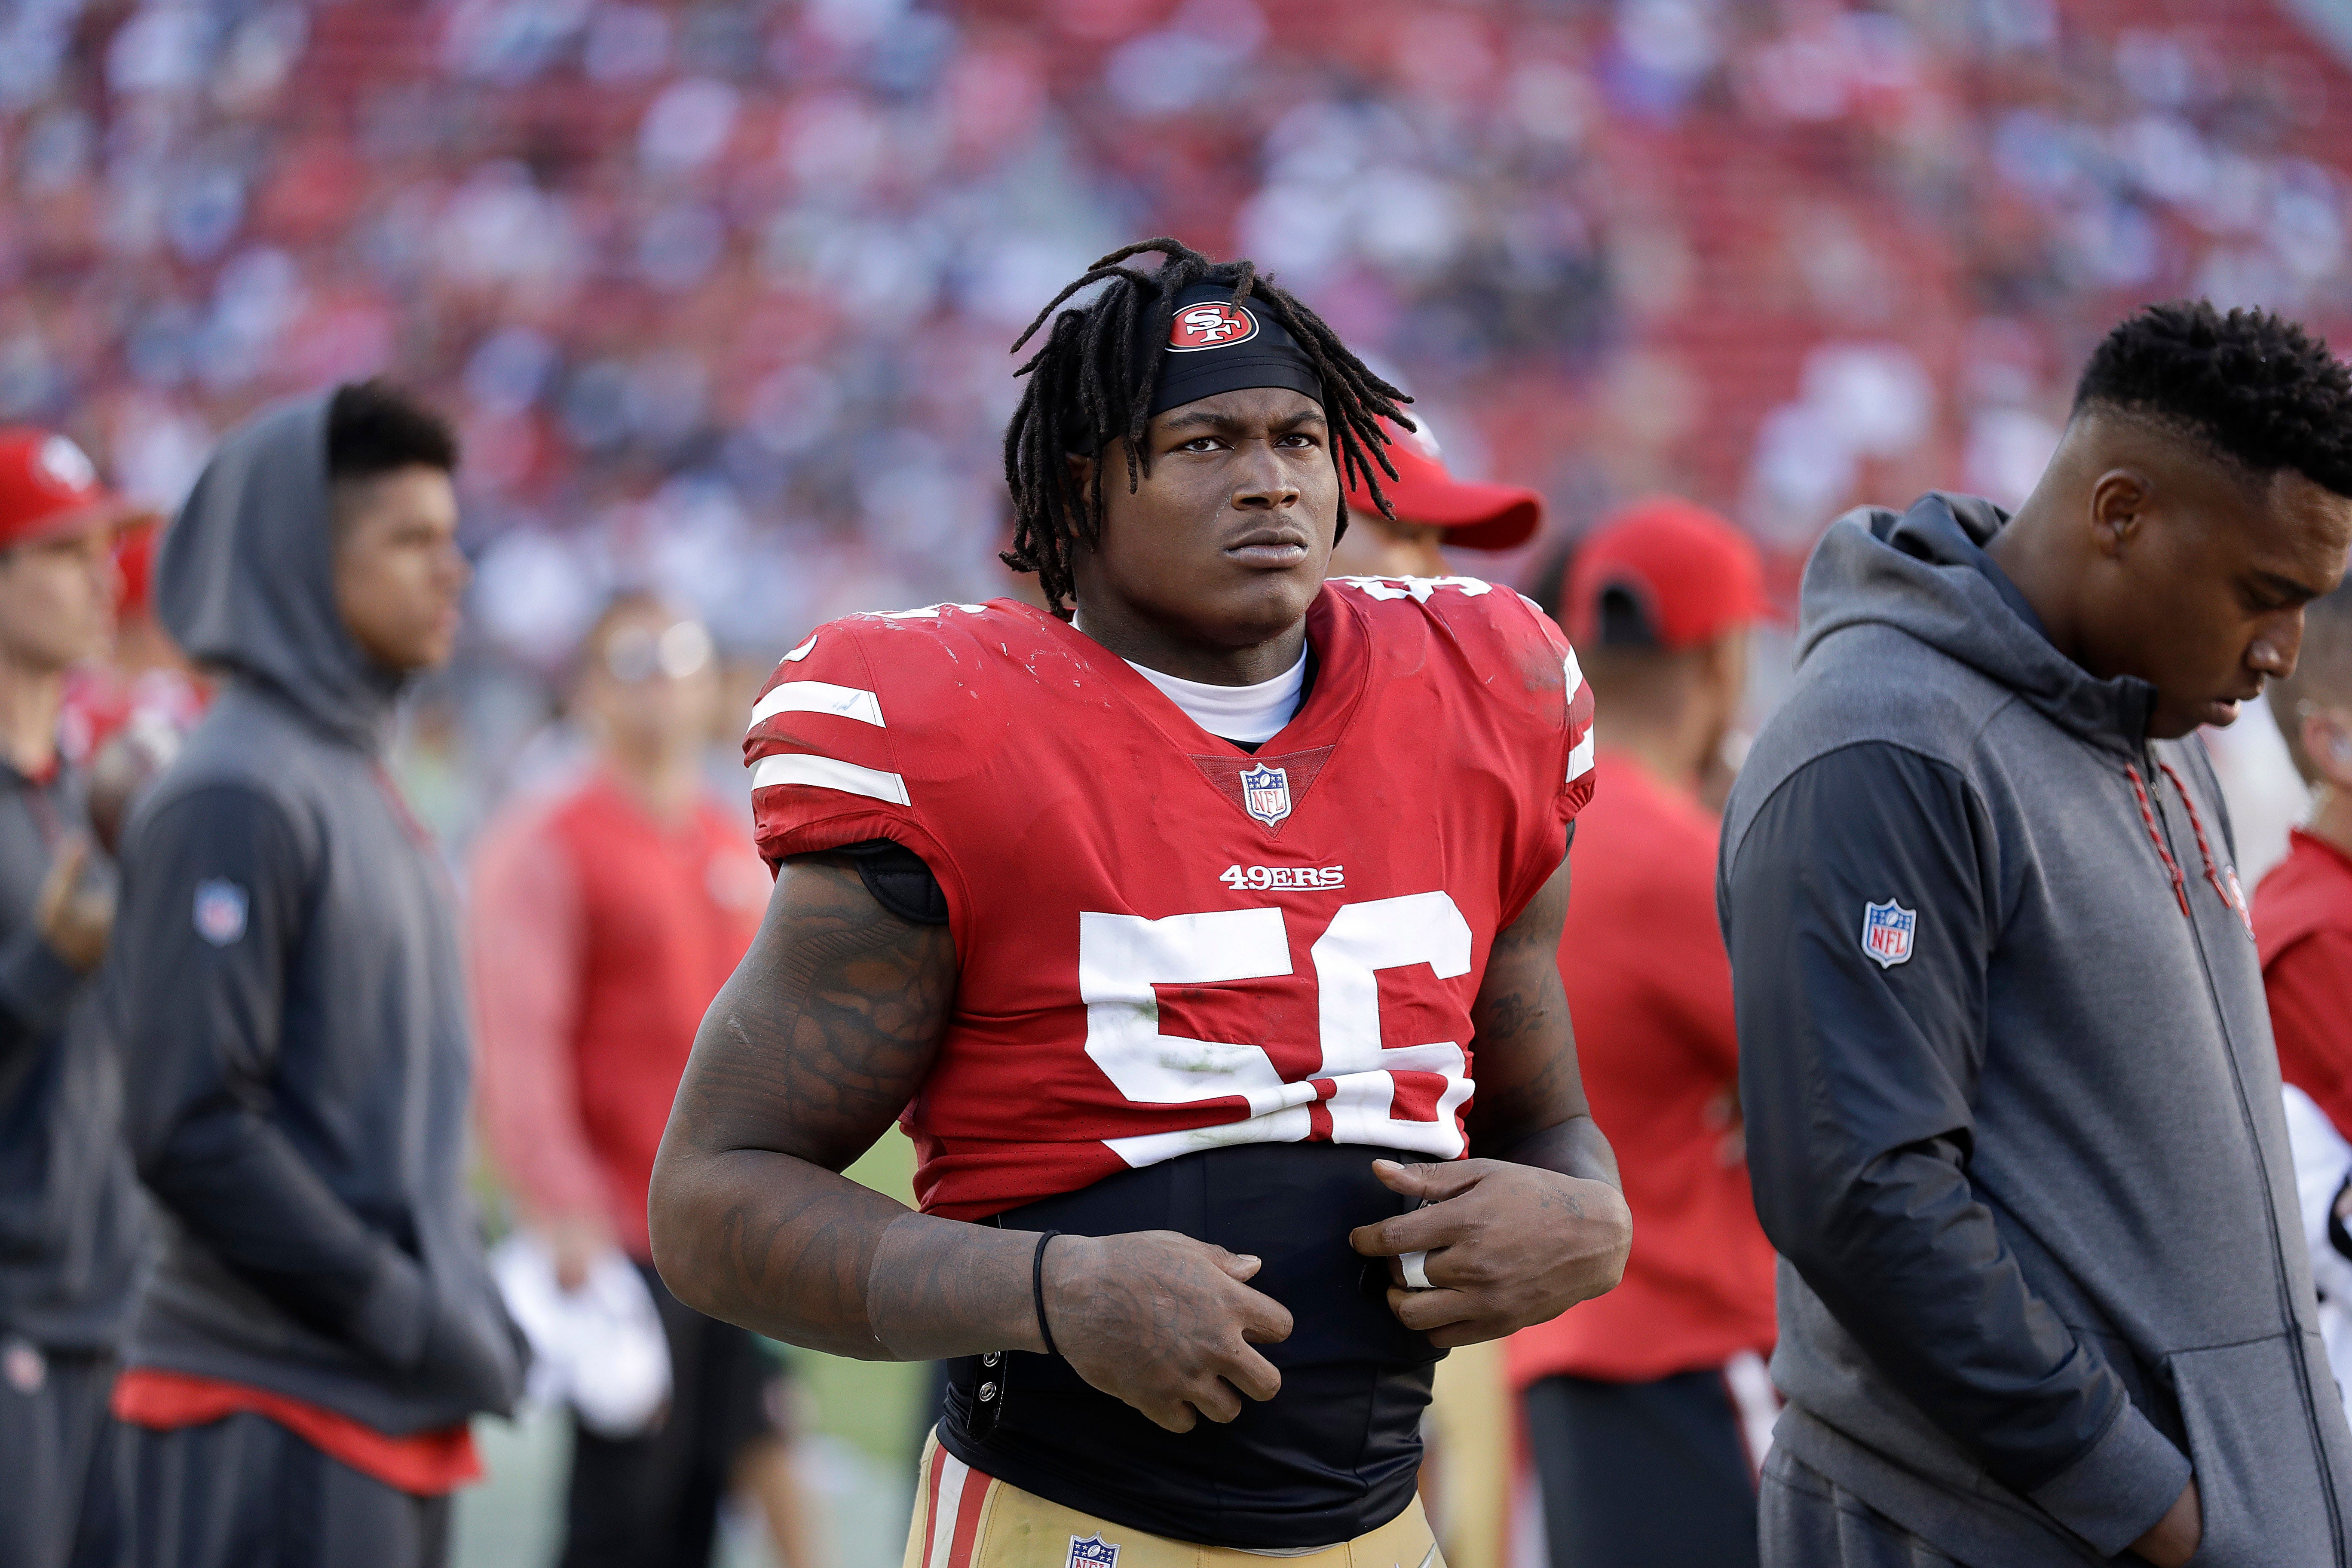 Reuben Foster charged with felony domestic violence after allegedly rupturing girlfriend's ear drum